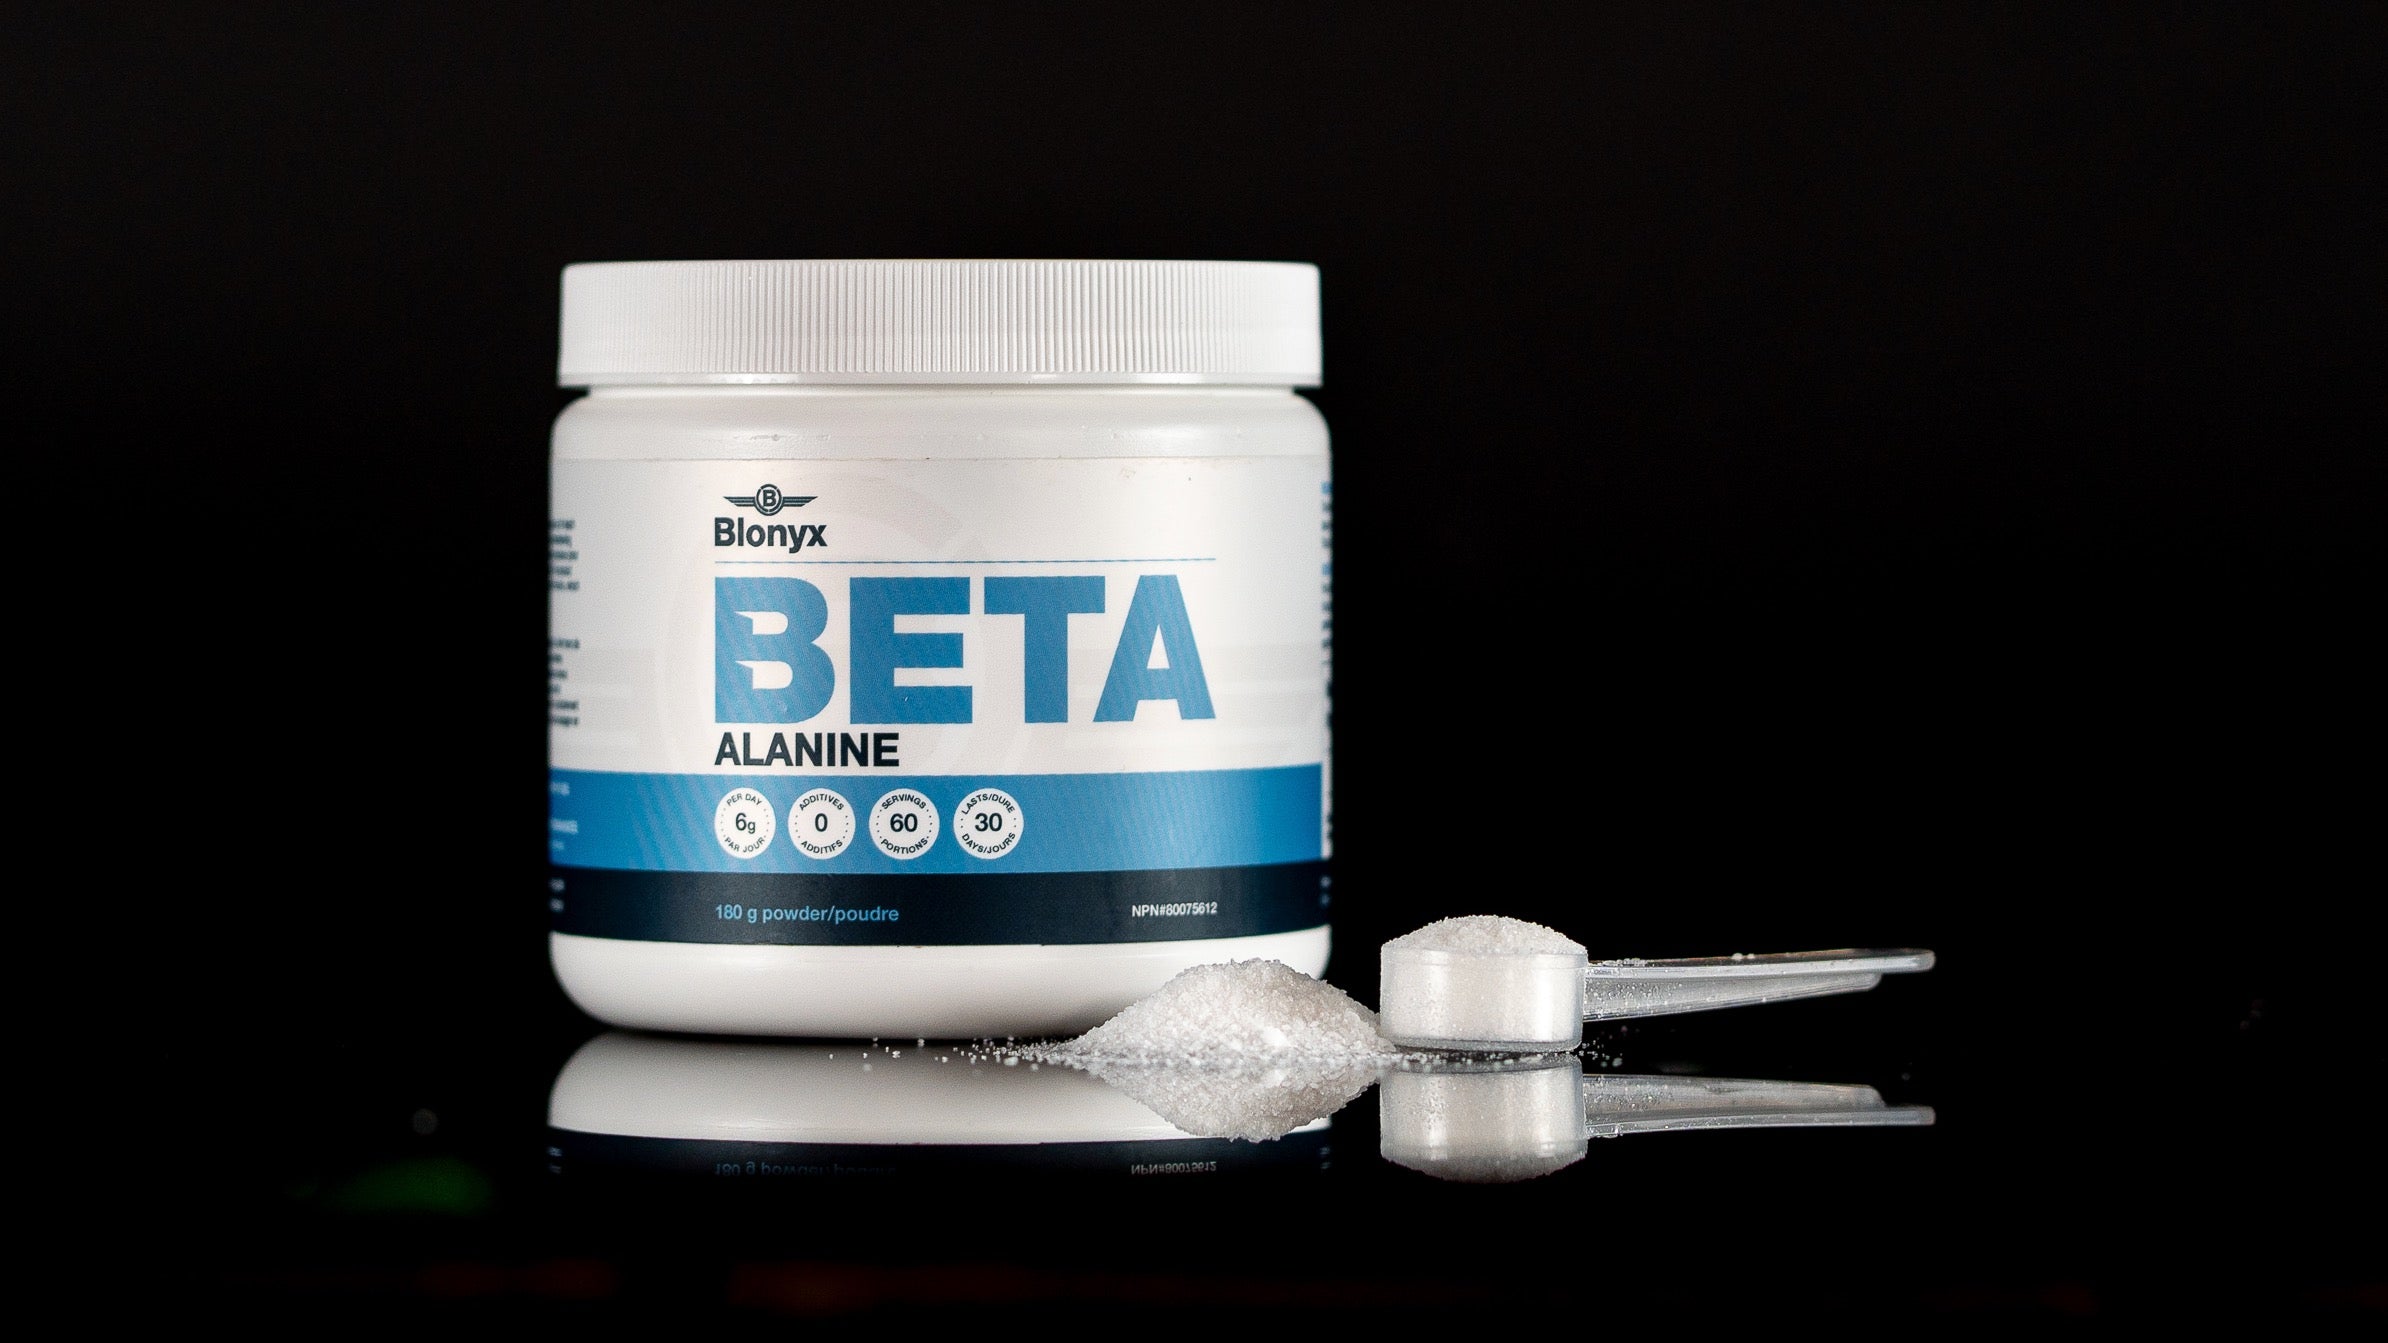 Blonyx Beta Alanine package and a scoop of the beta-alanine on a black background